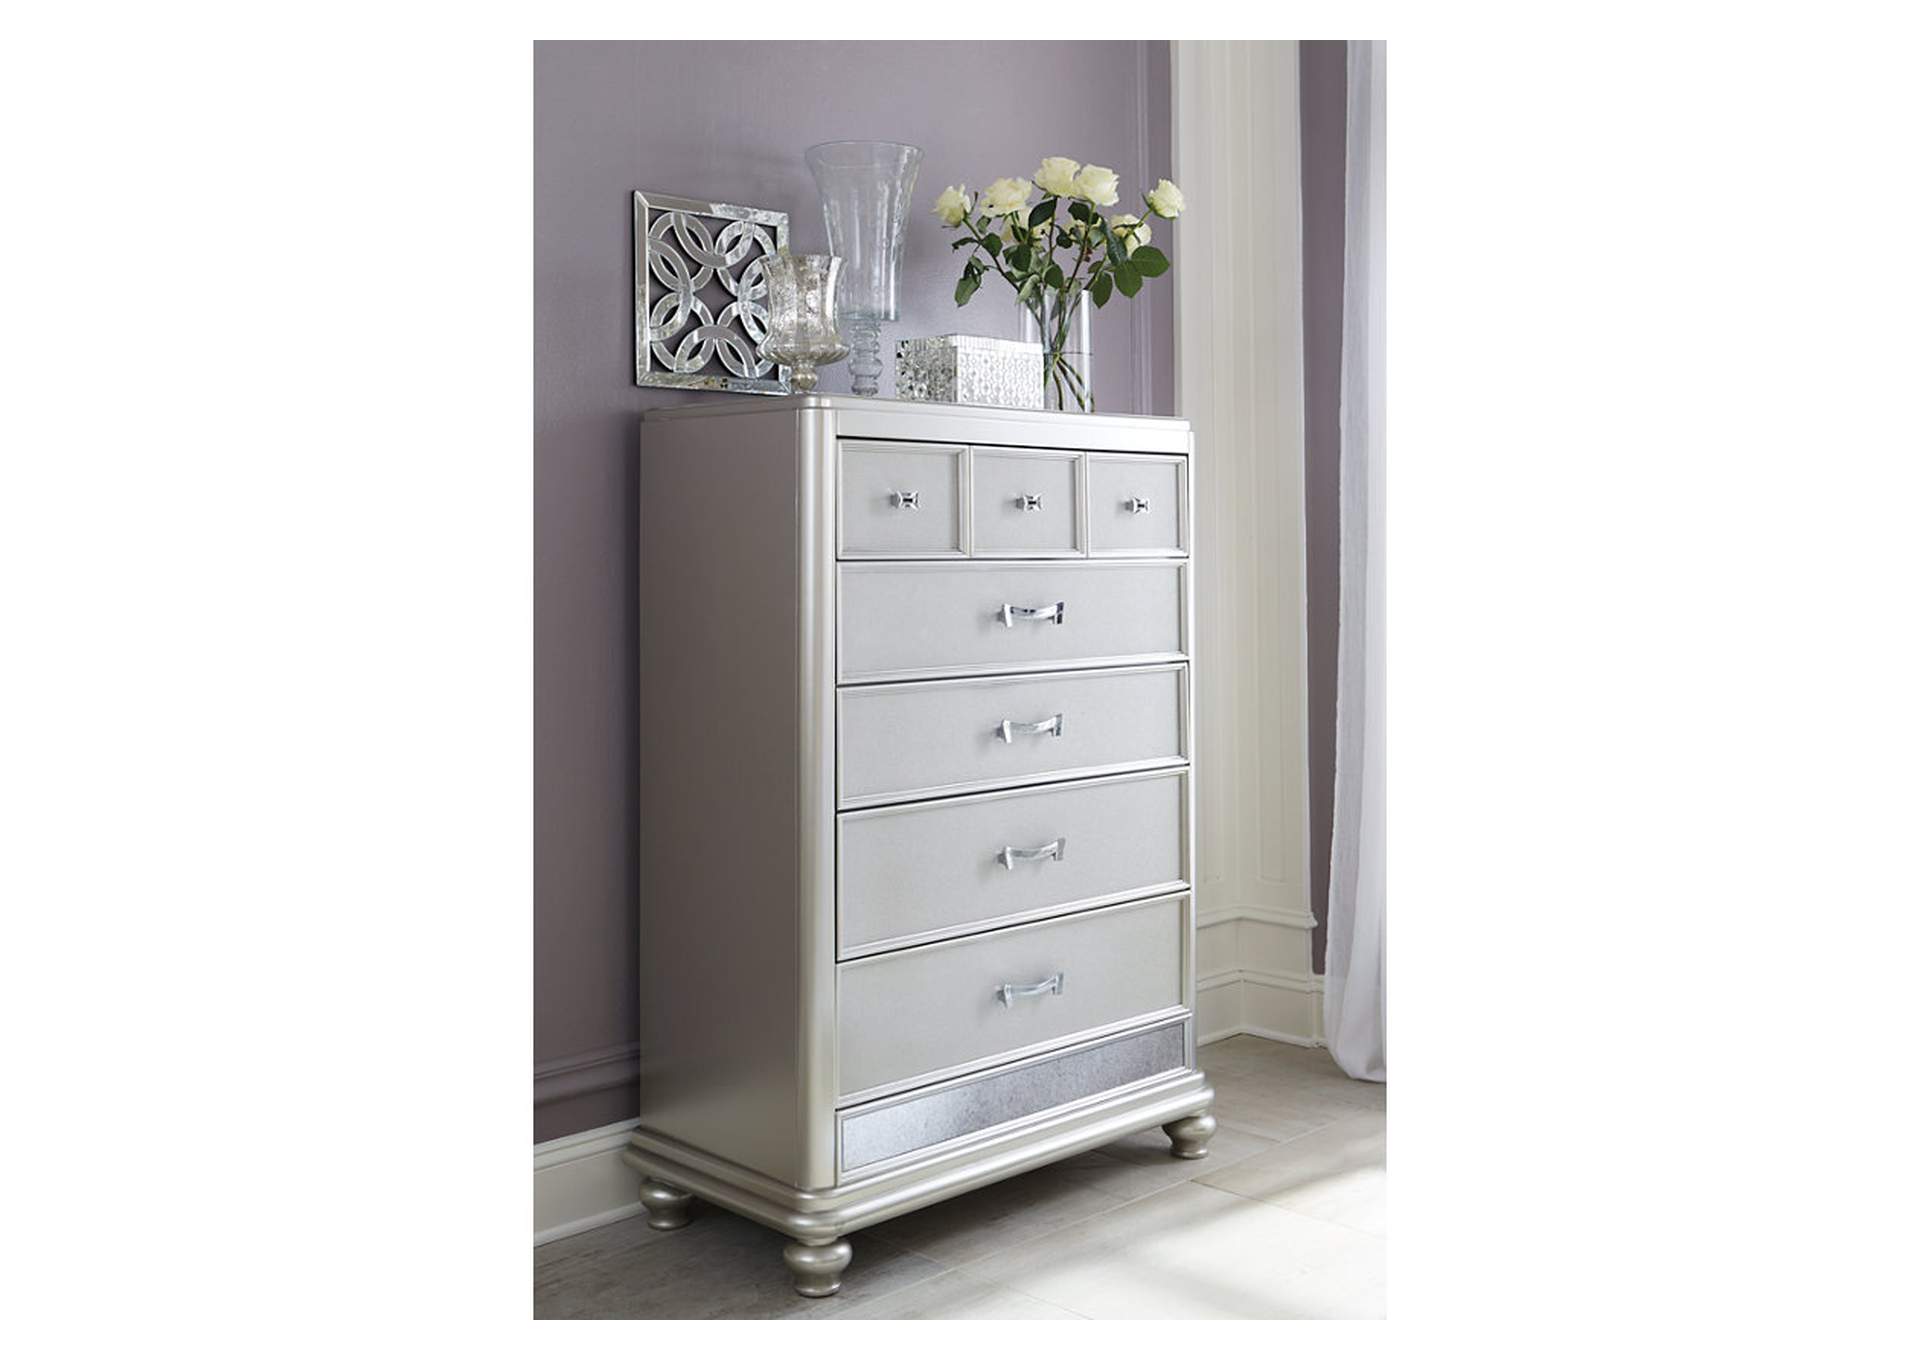 Coralayne Queen Upholstered Bed with Mirrored Dresser and Chest,Signature Design By Ashley